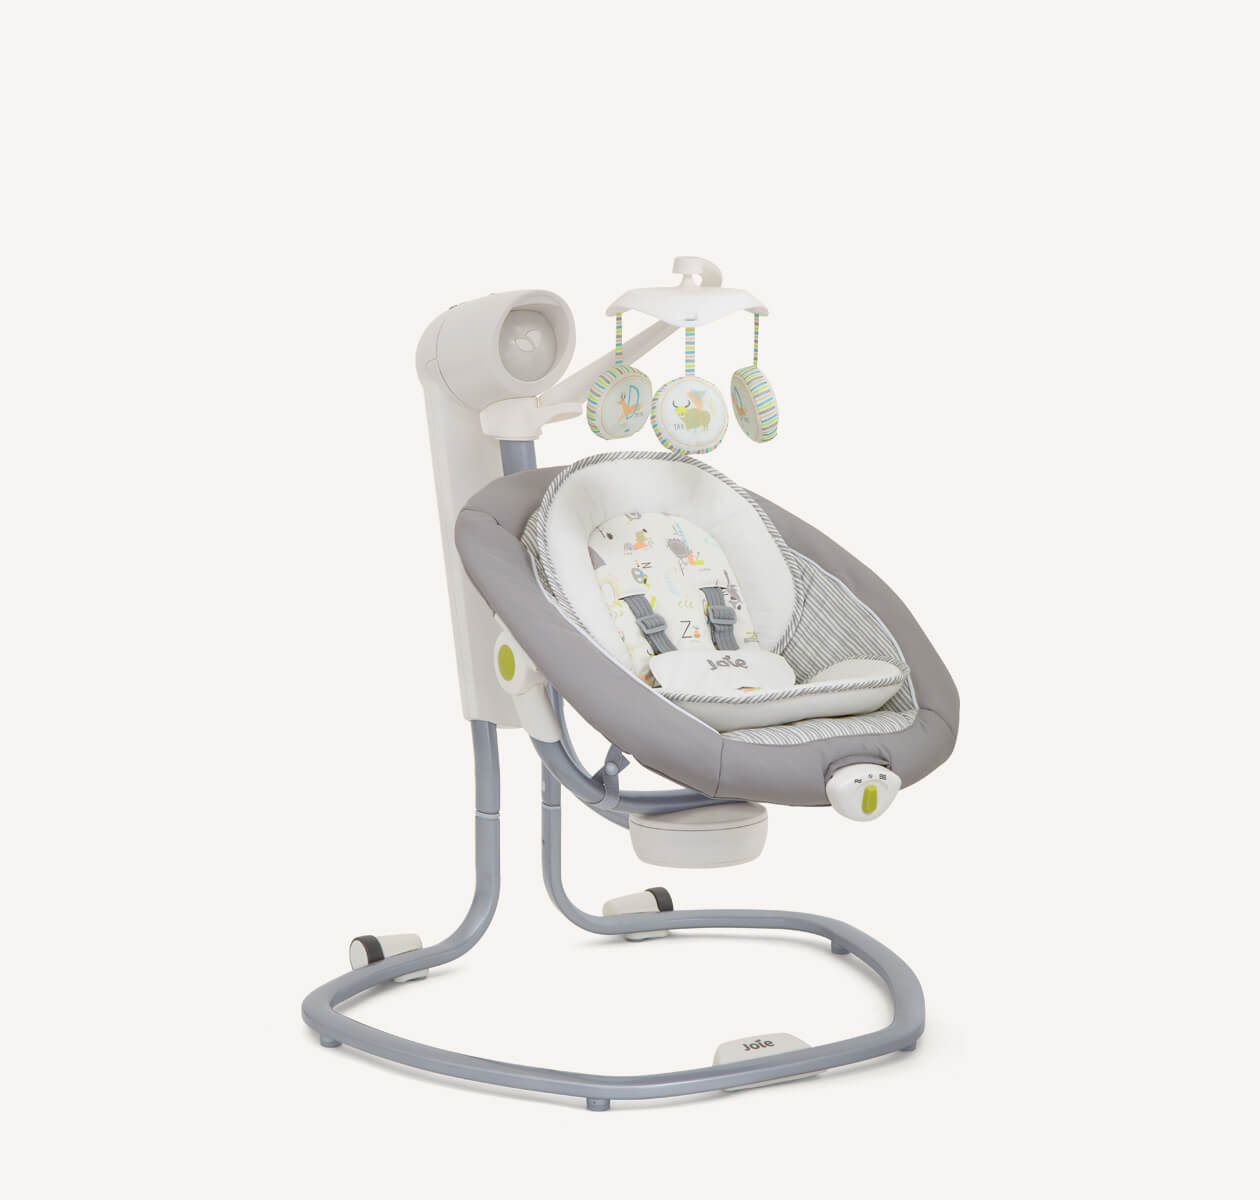 Joie Serina Swivel baby swing that is grey and white at a right angle.